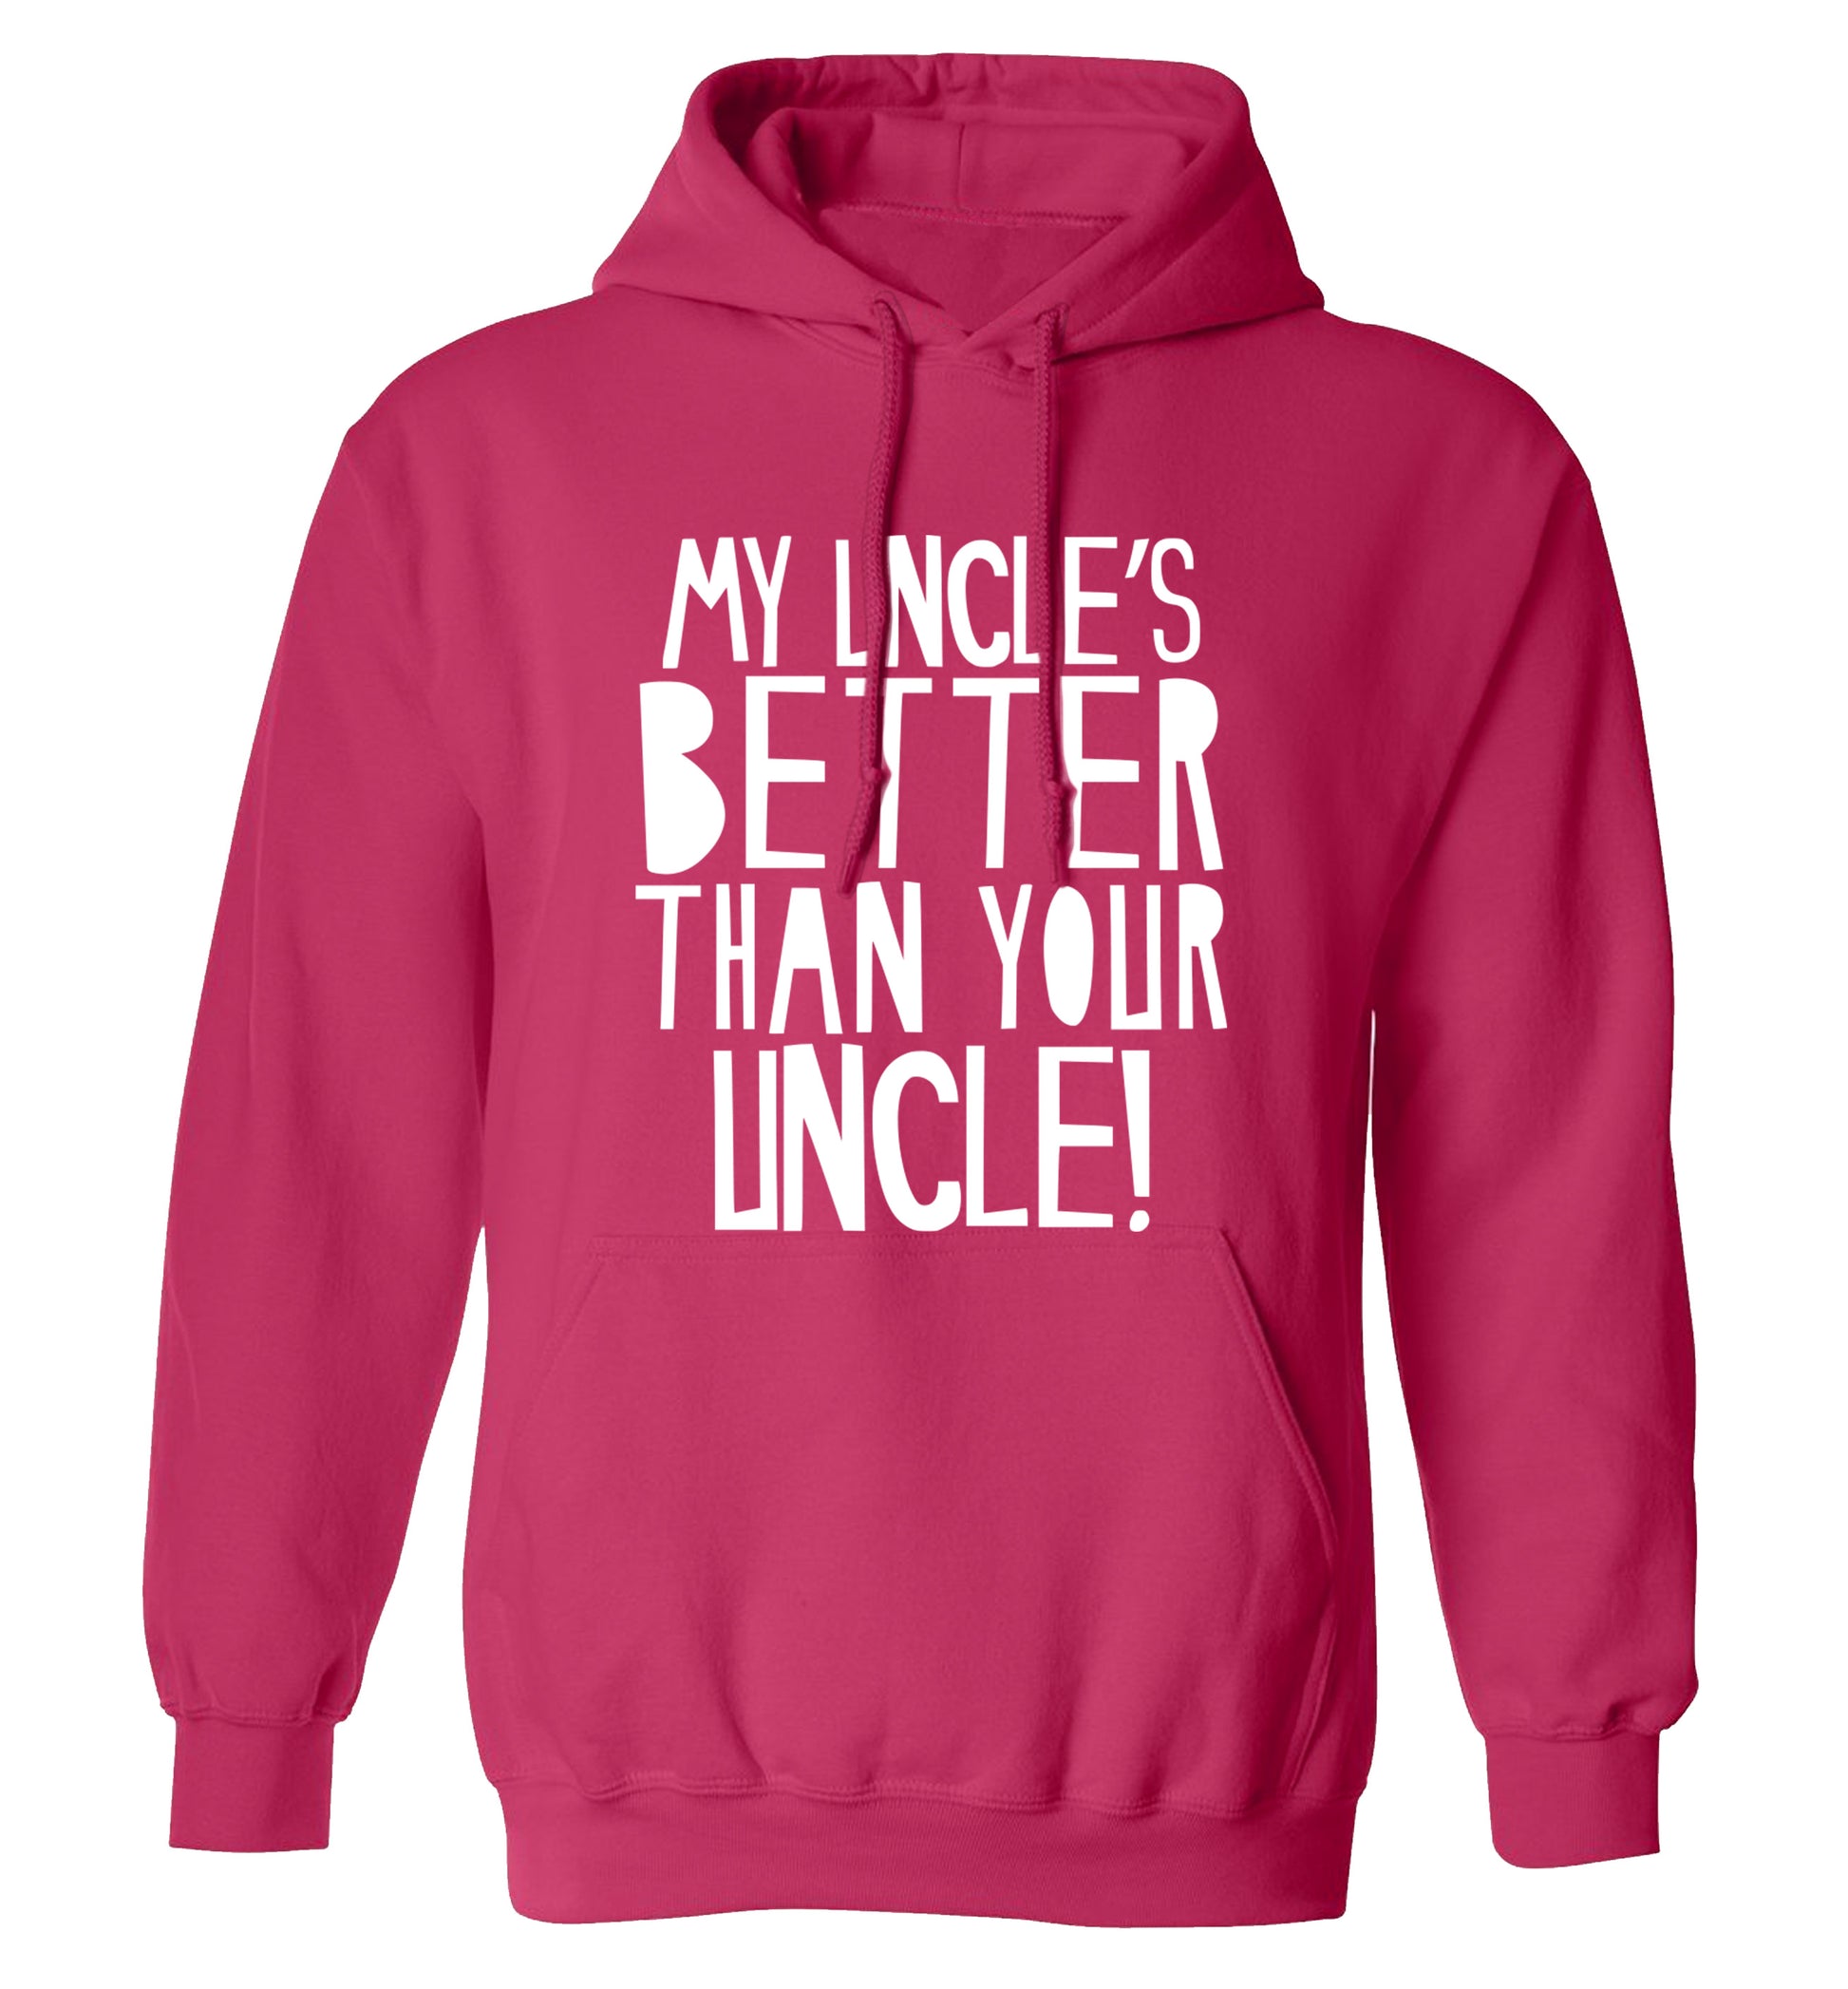 My uncles better than your uncle adults unisex pink hoodie 2XL